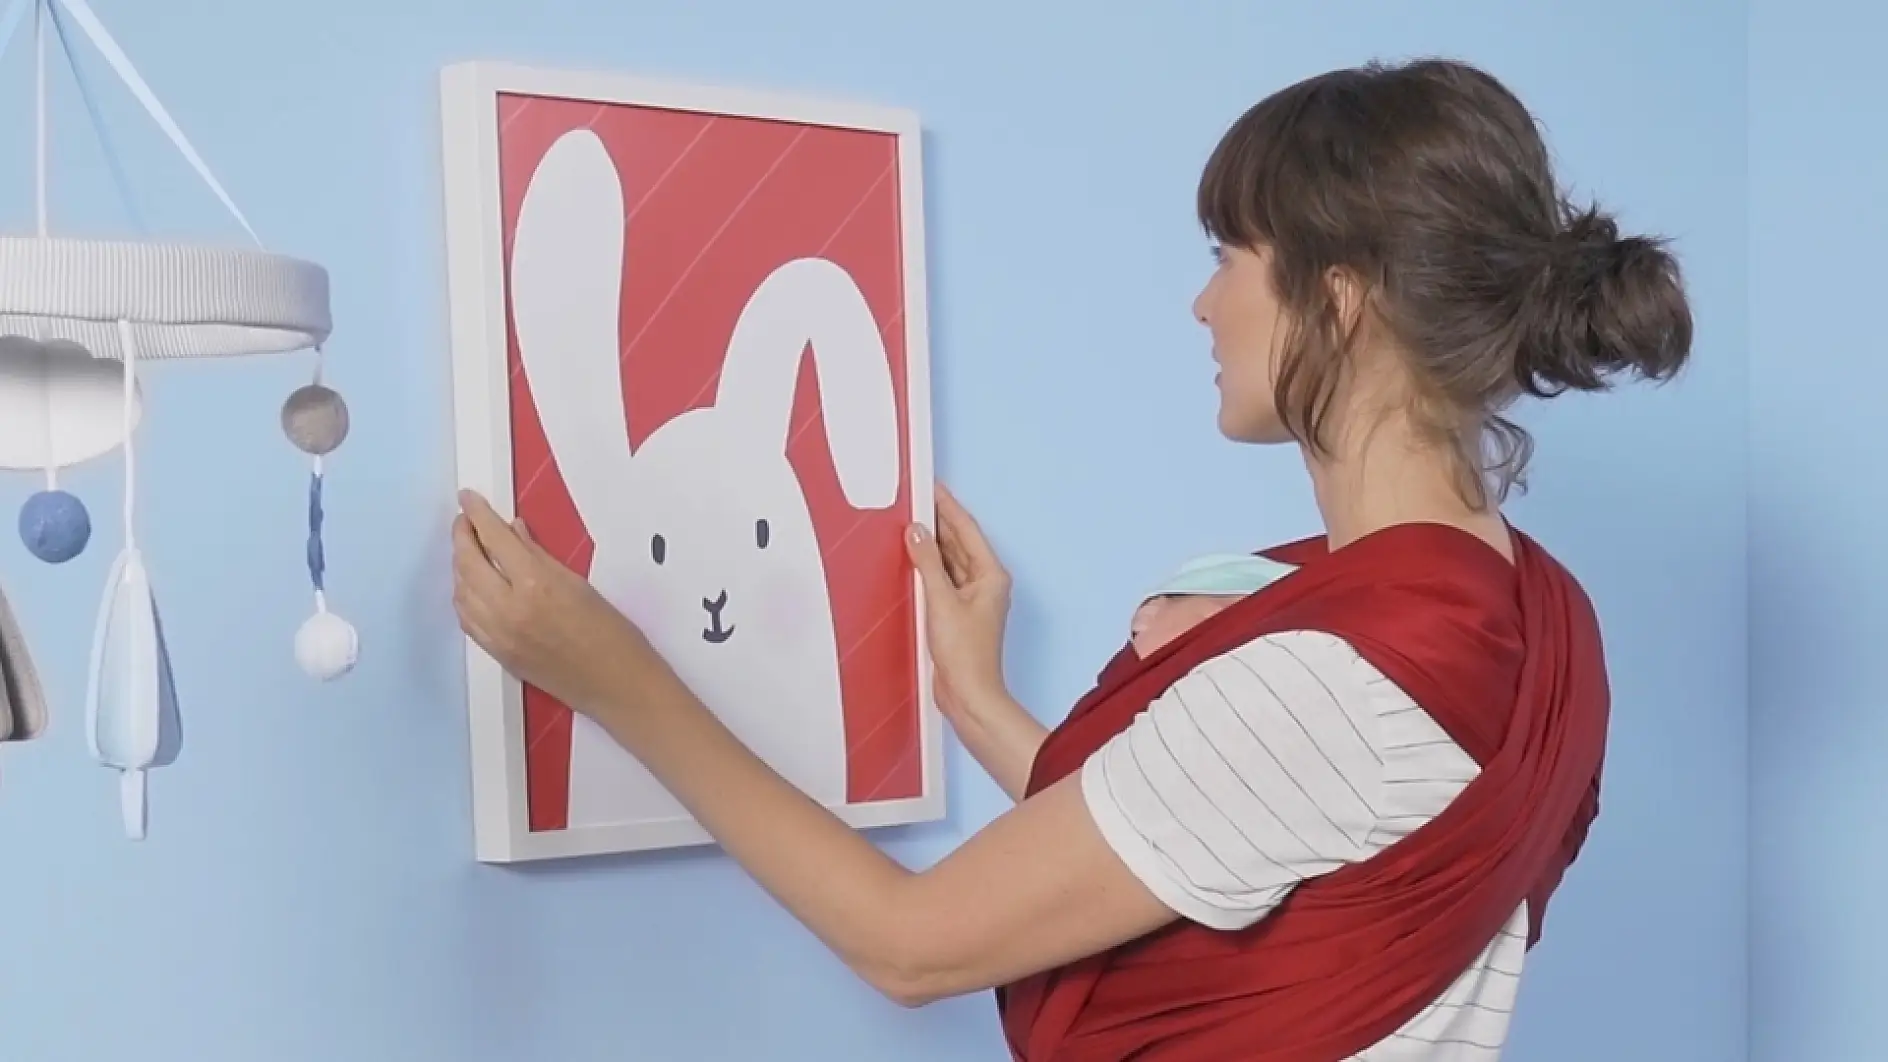 A woman is hanging up a frame with a playful children illustration.